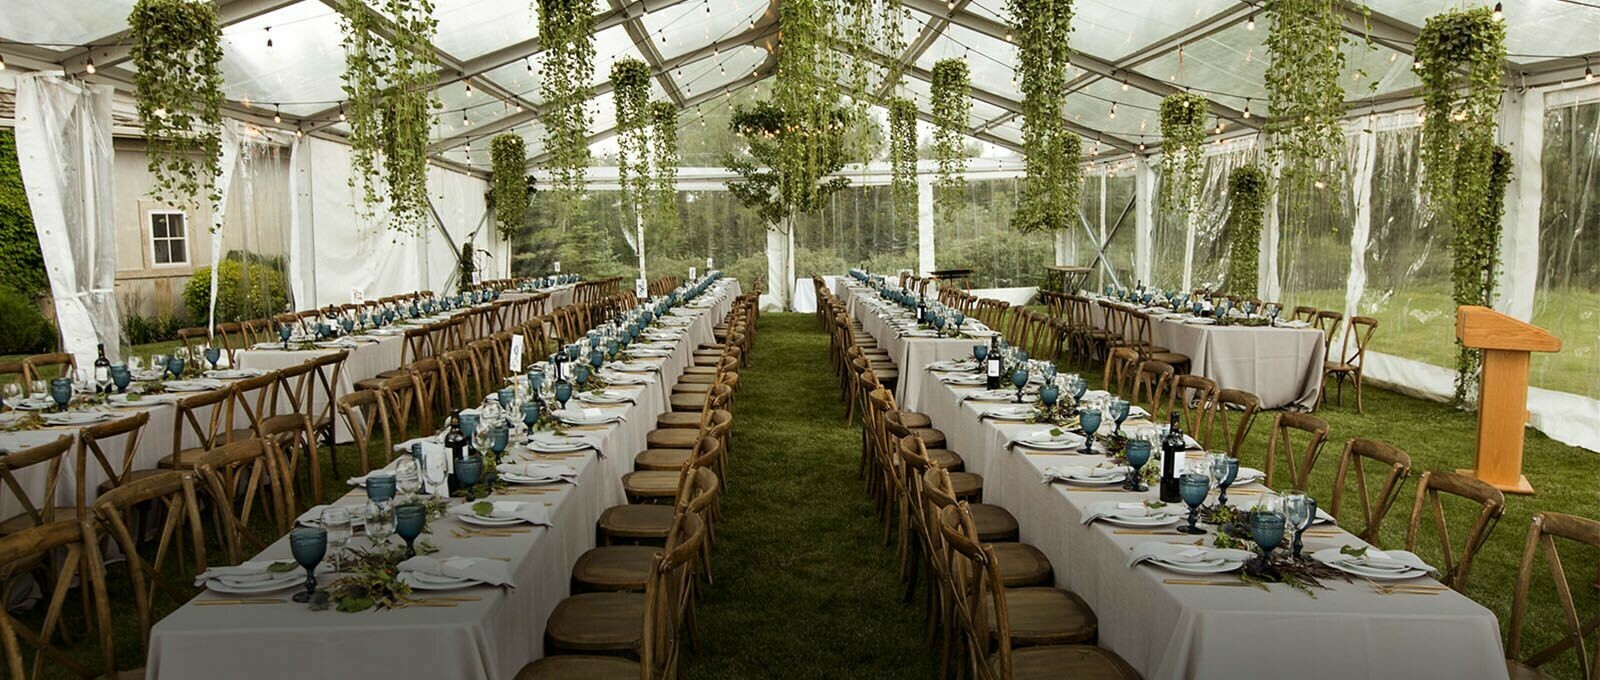 Special Event Rentals - Calgary Hero Banner - Green White and Rustic Wedding Under a Clearspan Tent